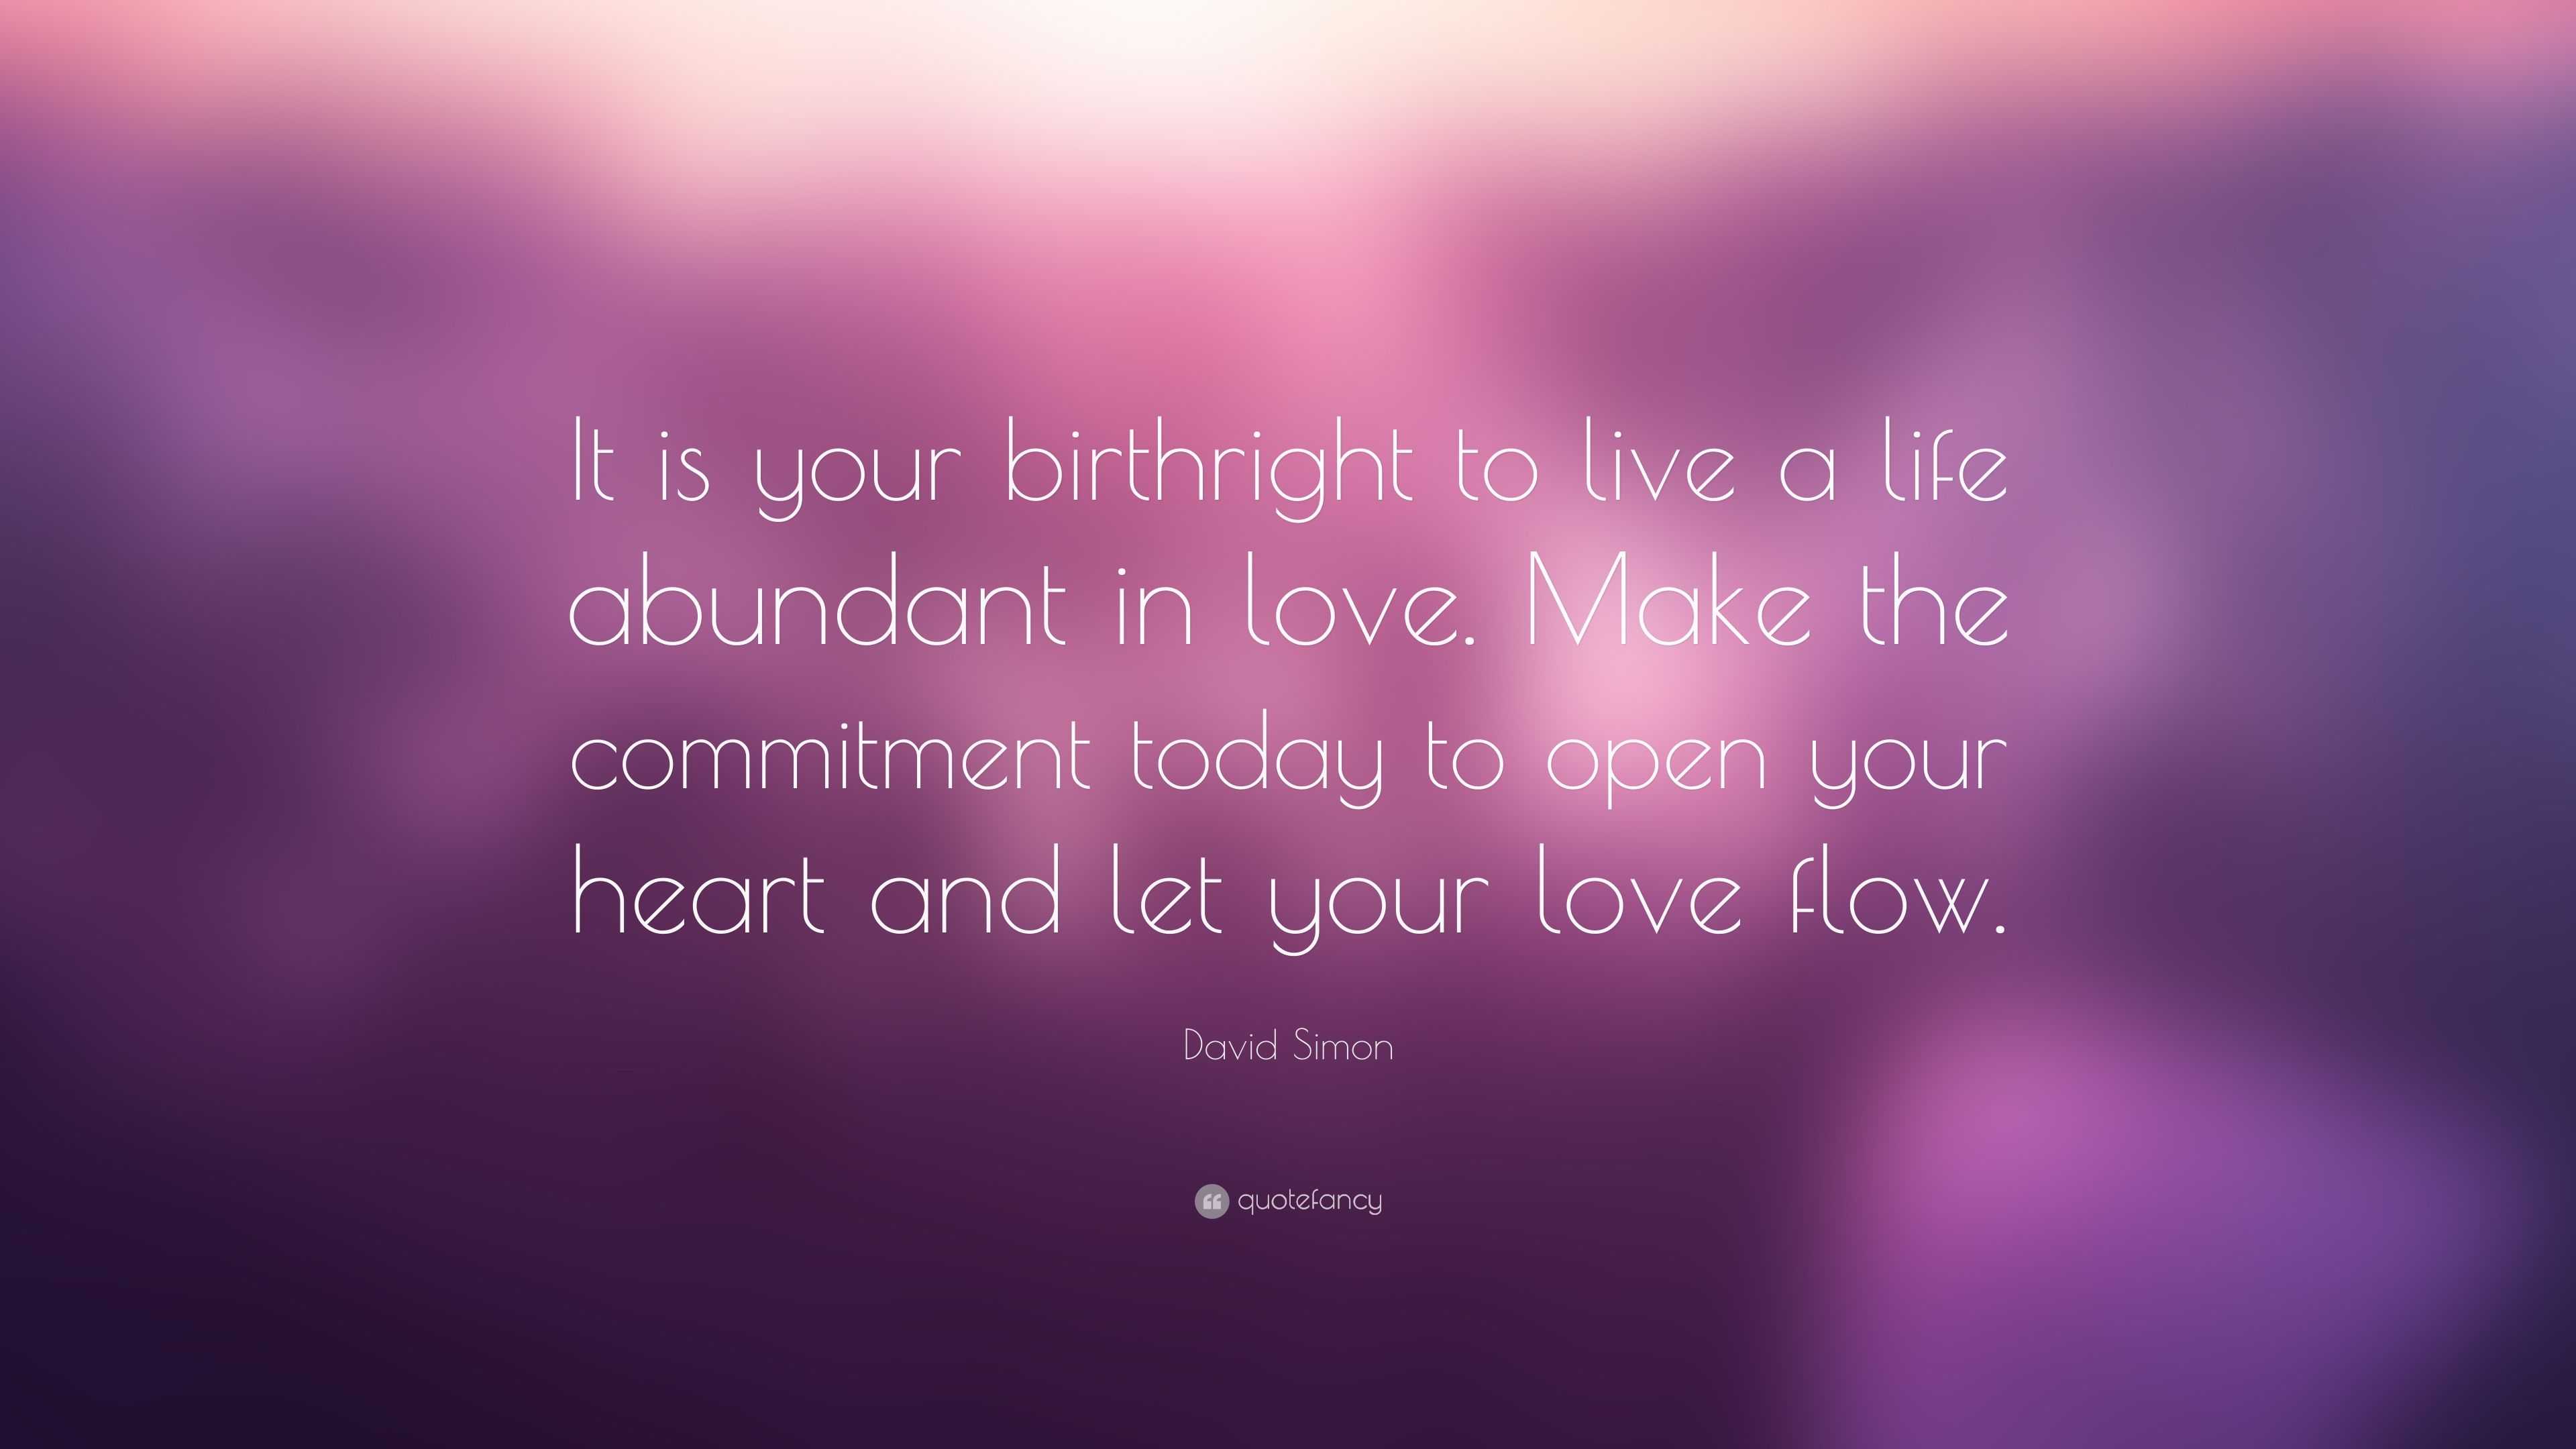 David Simon Quote “It is your birthright to live a life abundant in love